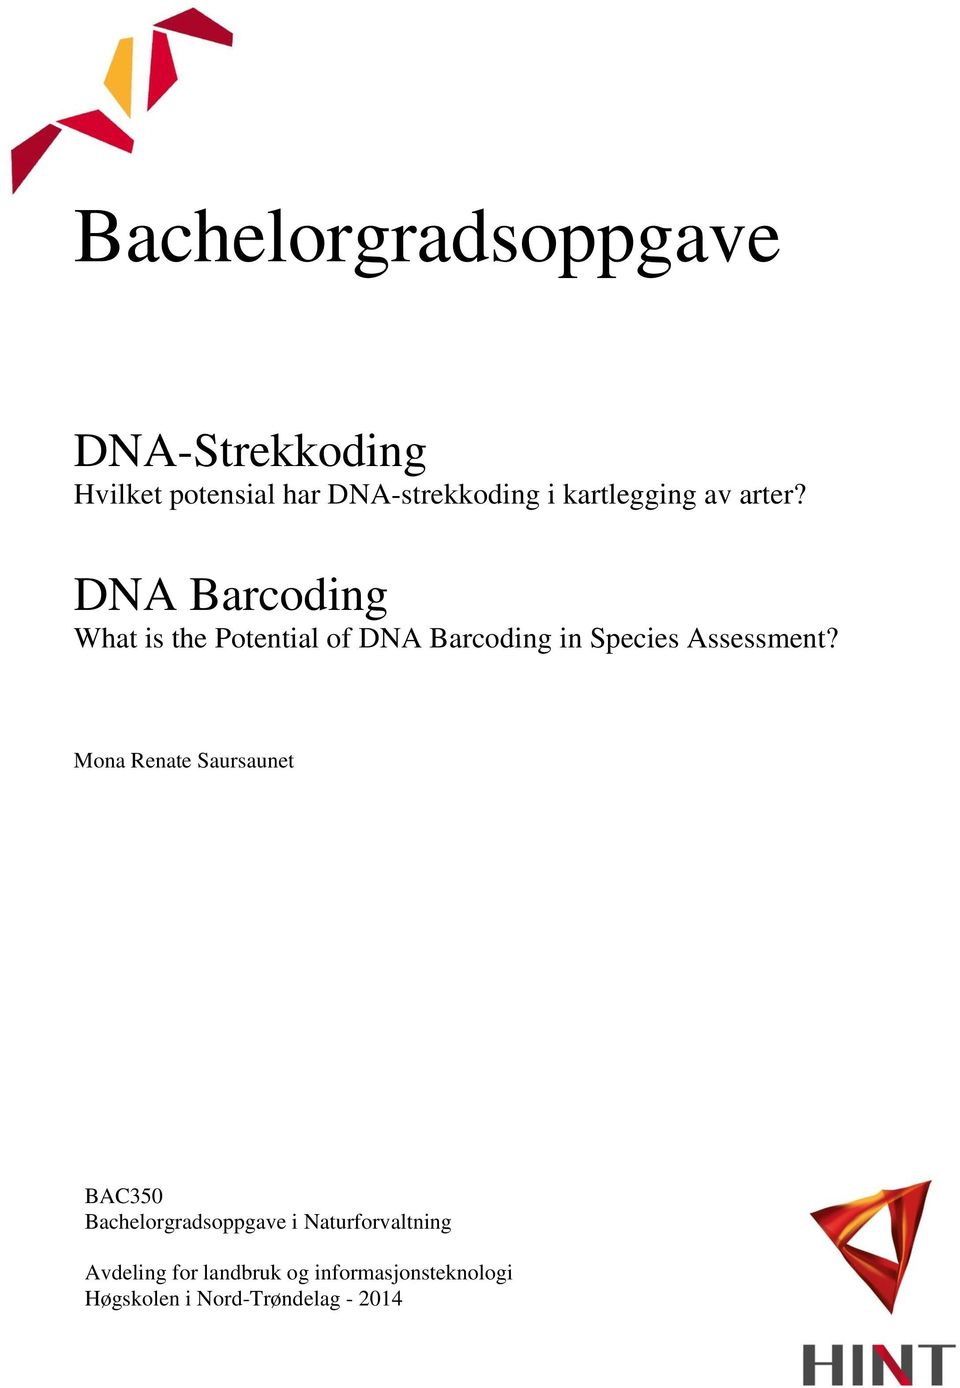 DNA Barcoding What is the Potential of DNA Barcoding in Species Assessment?